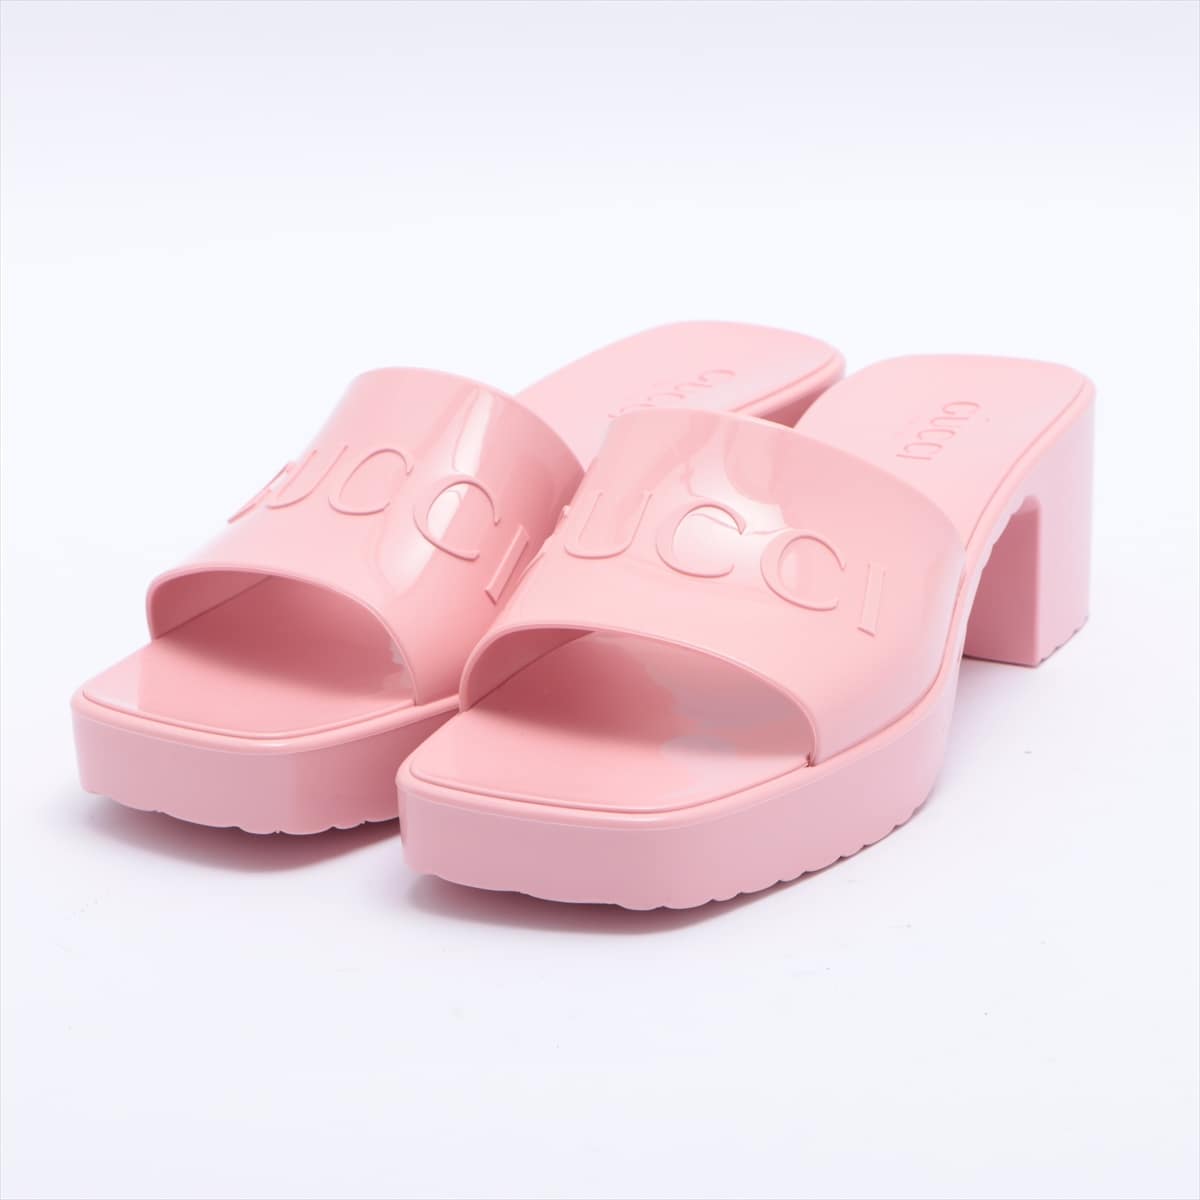 Gucci Rubber Sandals 39 Ladies' Pink 624730